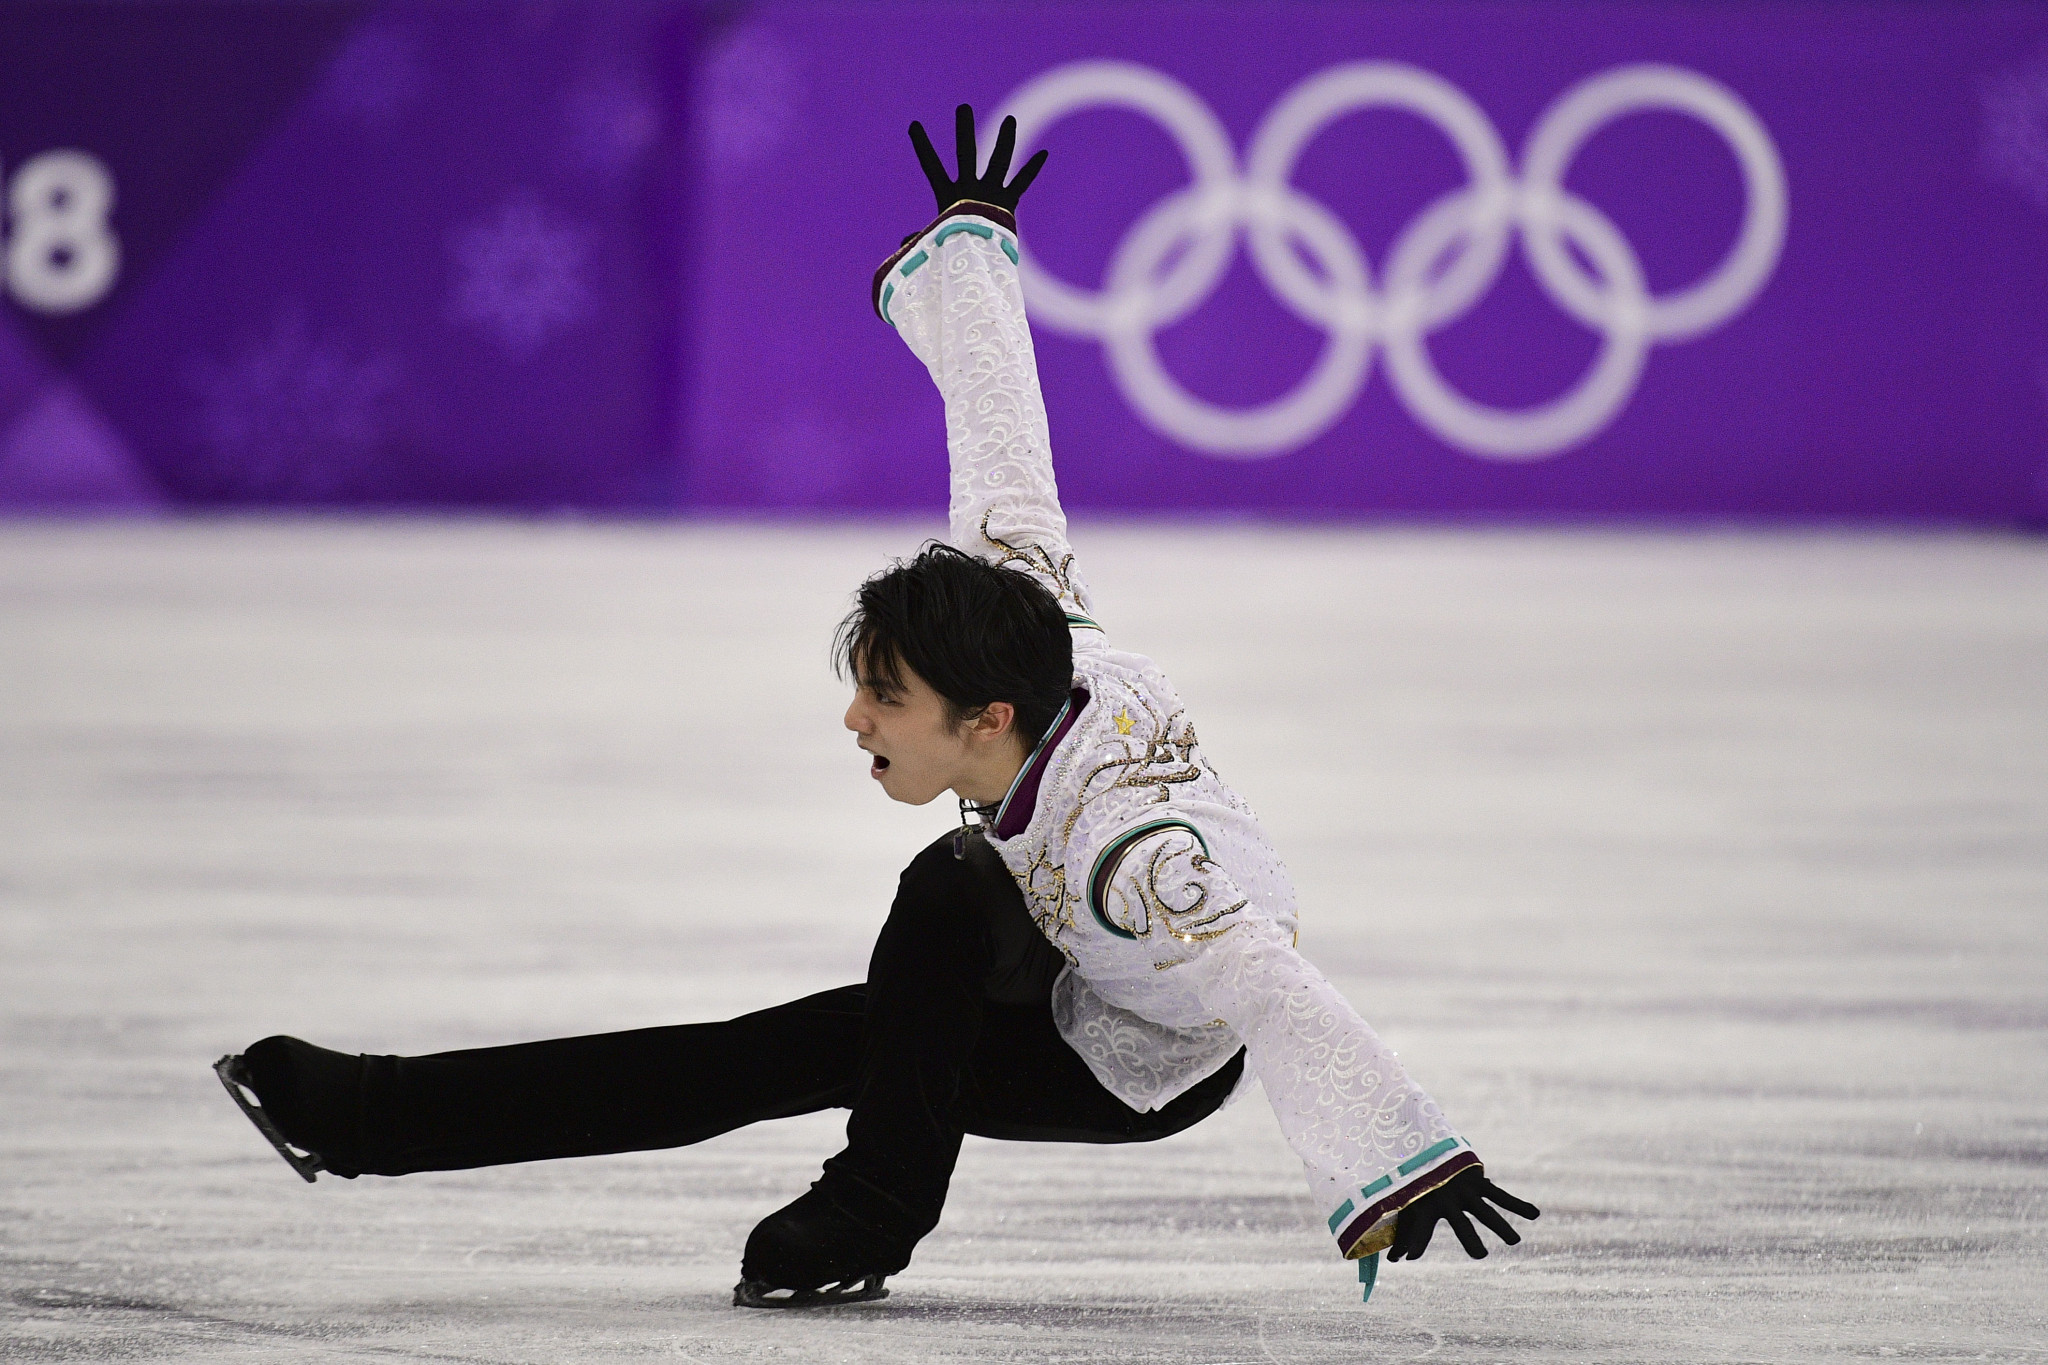 Reigning Olympic champion Yuzuru Hanyu is among those set to compete in the Grand Prix series ©Getty Images